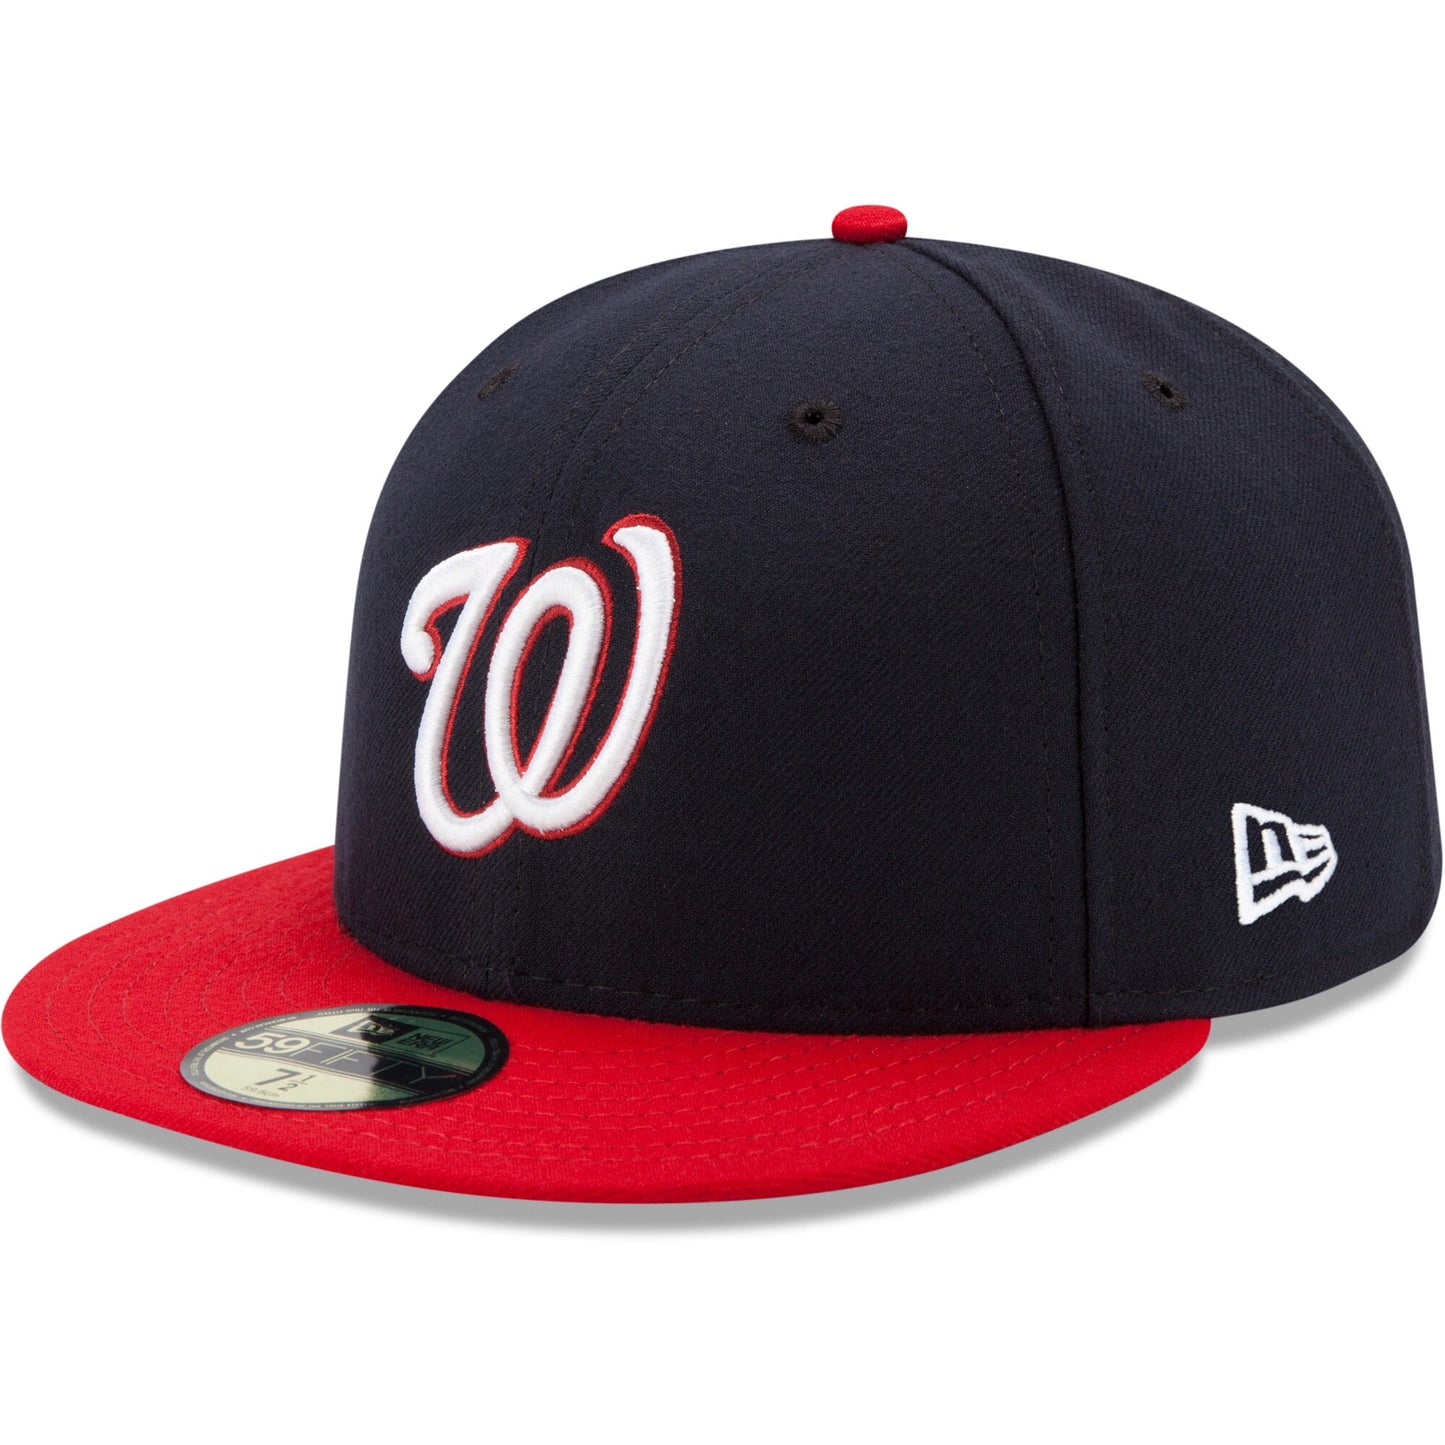 Washington Nationals New Era Alternate Authentic Collection On-Field 59FIFTY Fitted Hat - Navy/Red